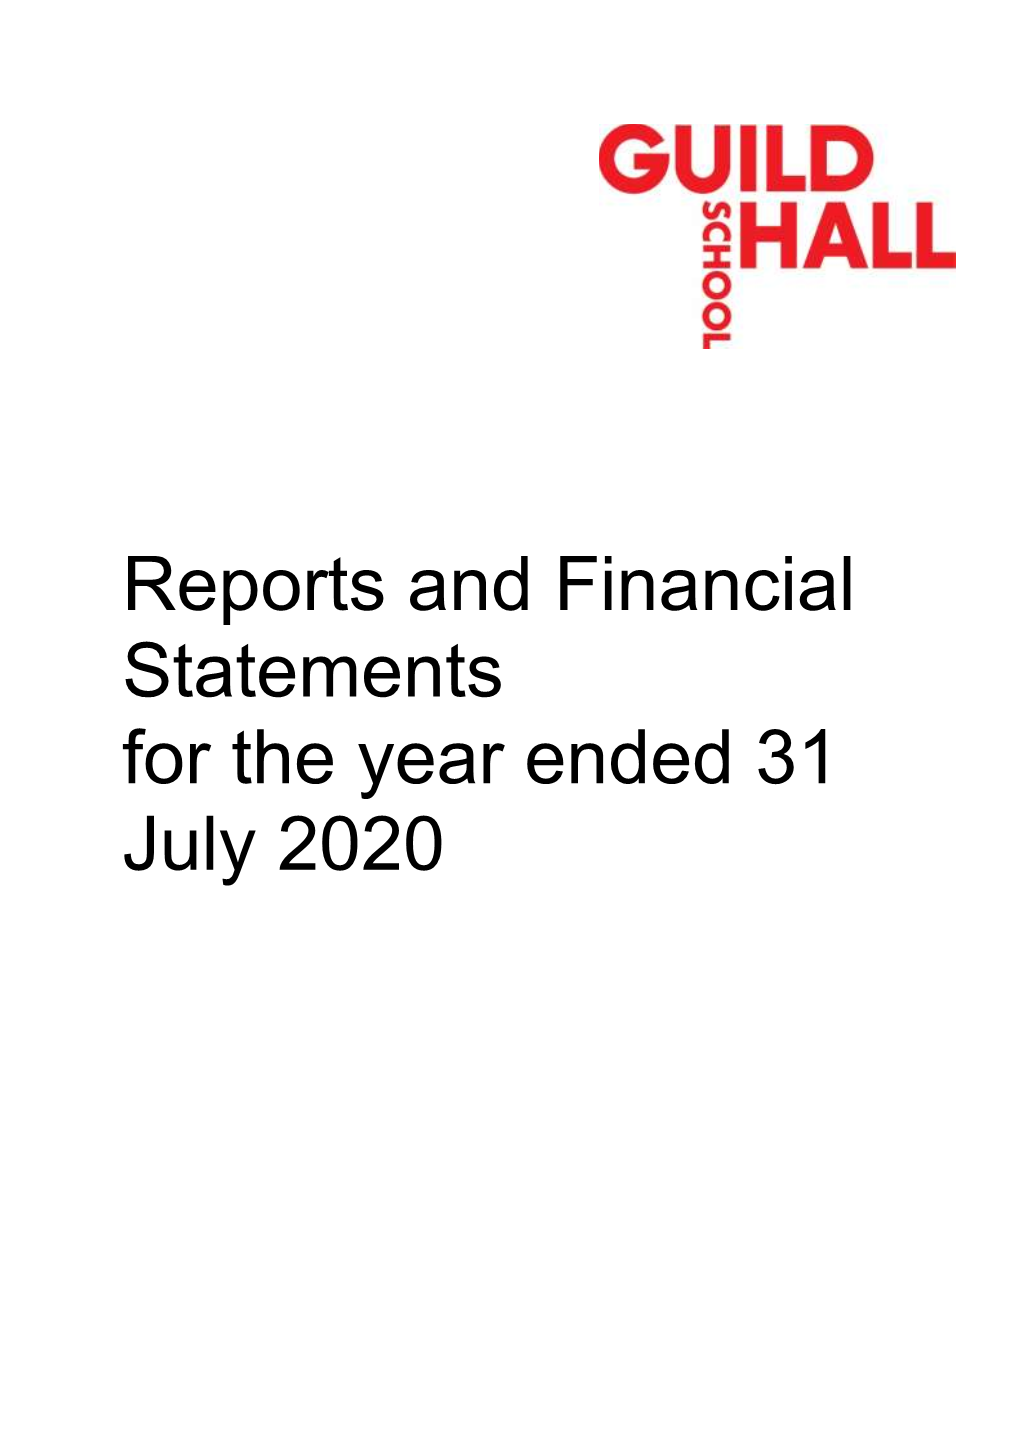 Reports and Financial Statements for the Year Ended 31 July 2020